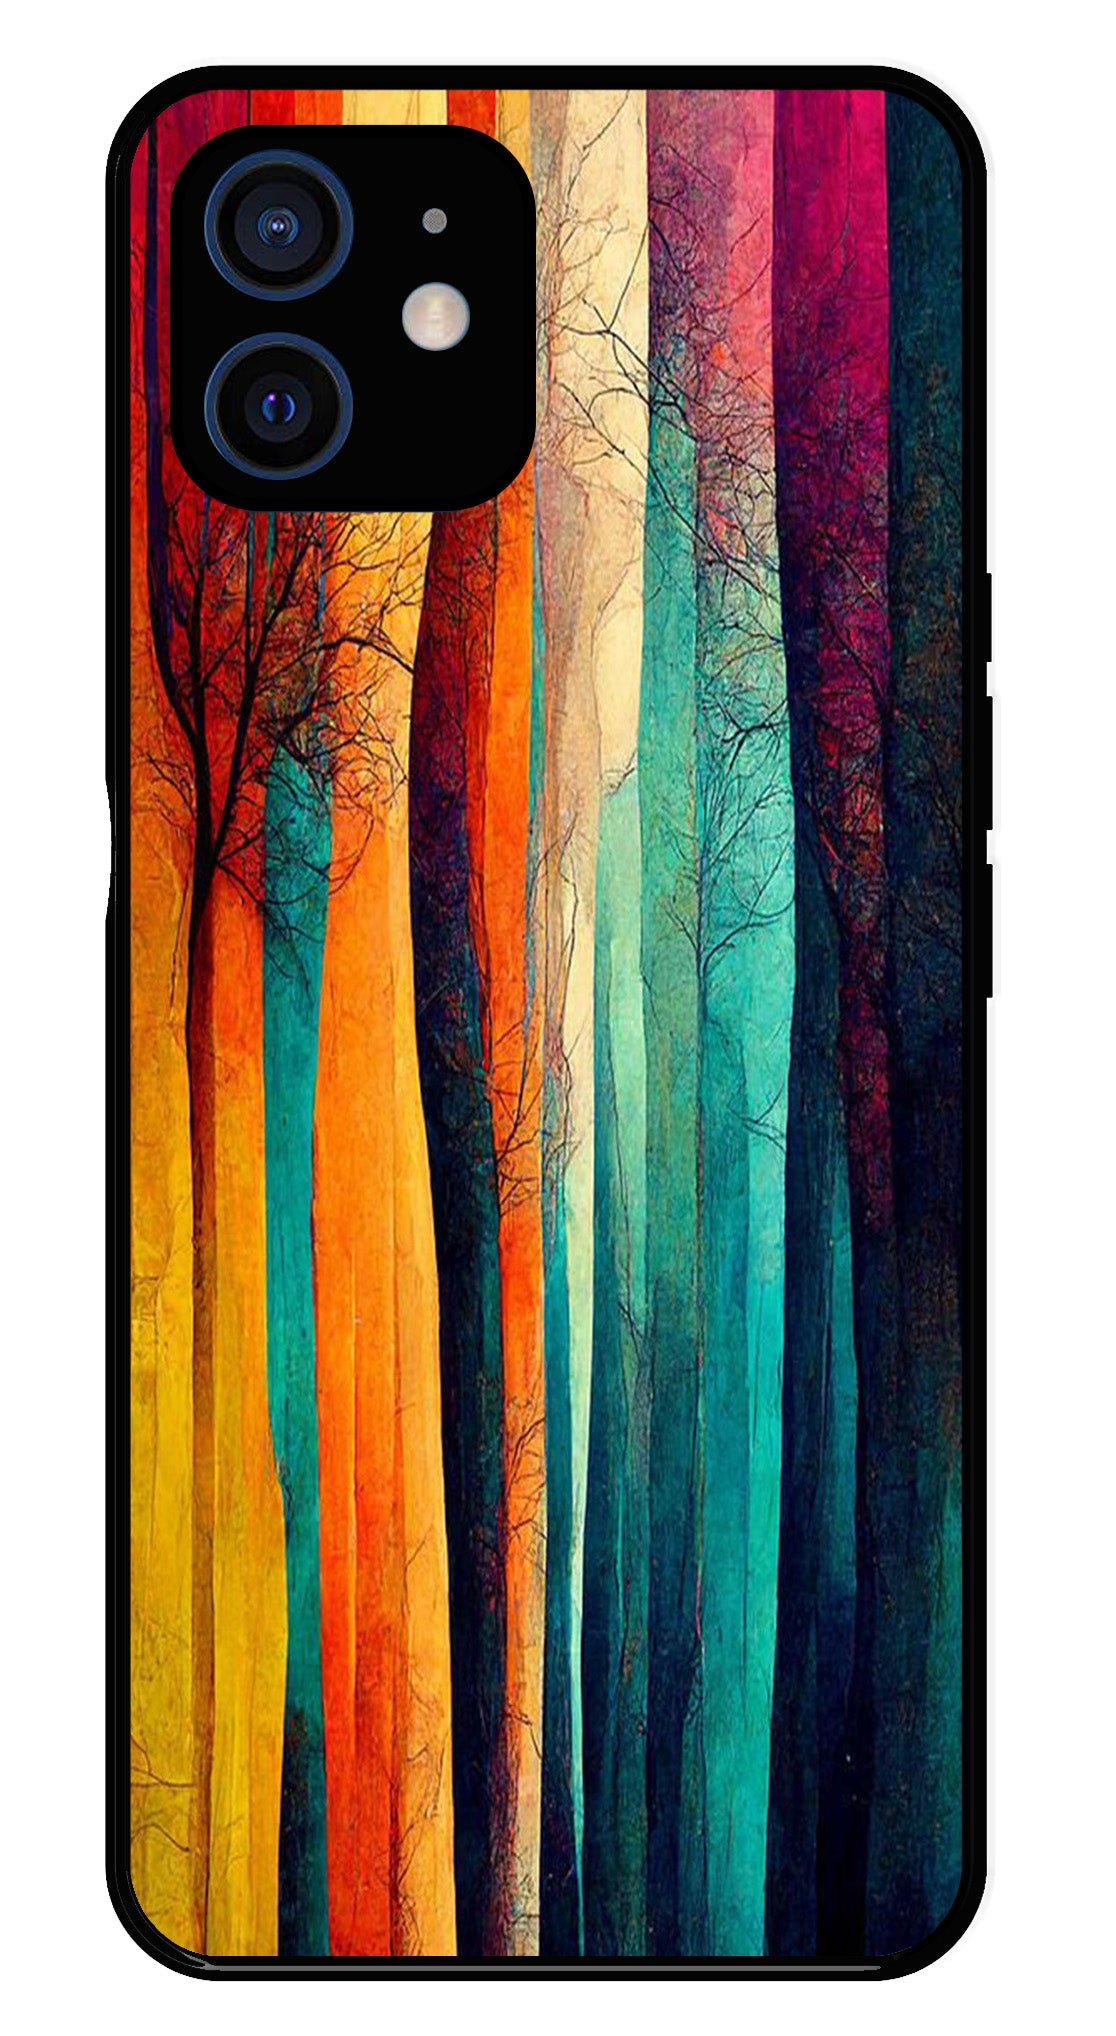 Modern Art Colorful Metal Mobile Case for iPhone 12 Mini